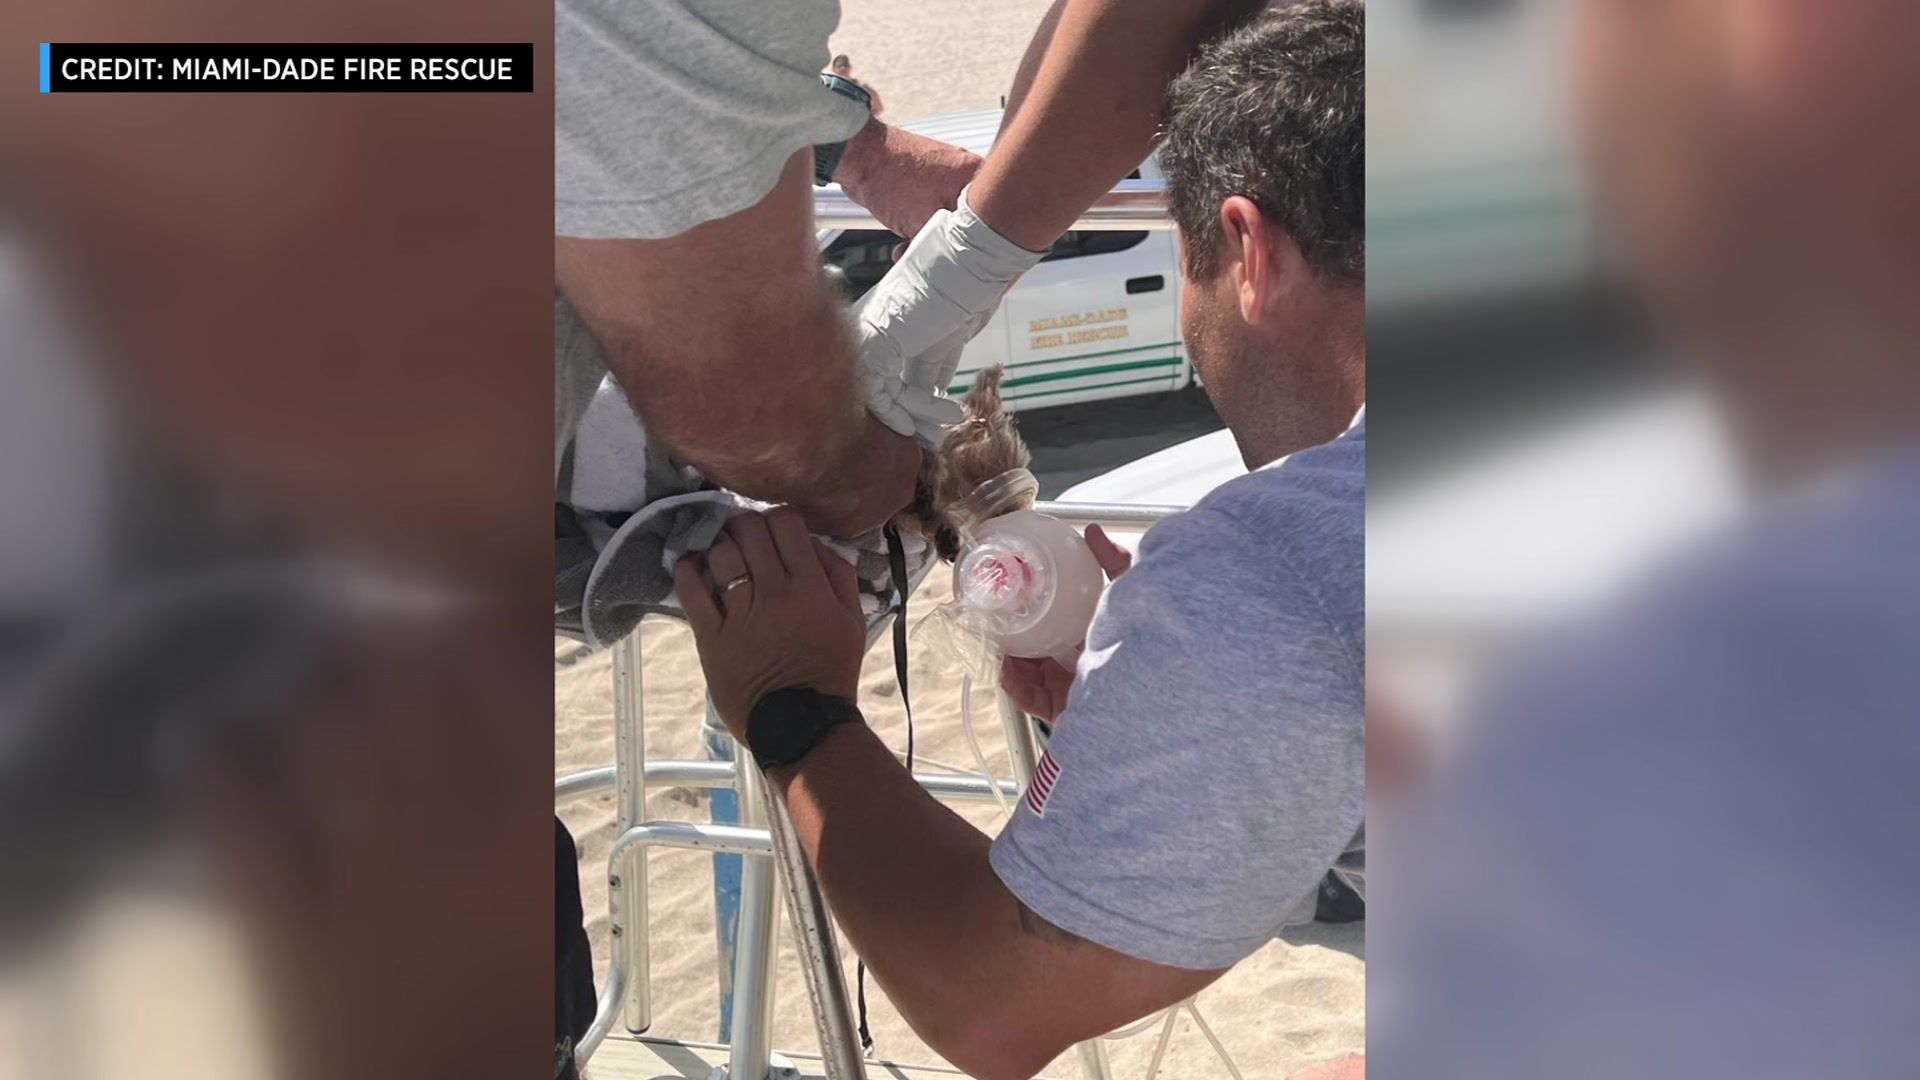 Miami-Dade Fire Rescue Saves Small Dog From Drowning At Haulover Beach